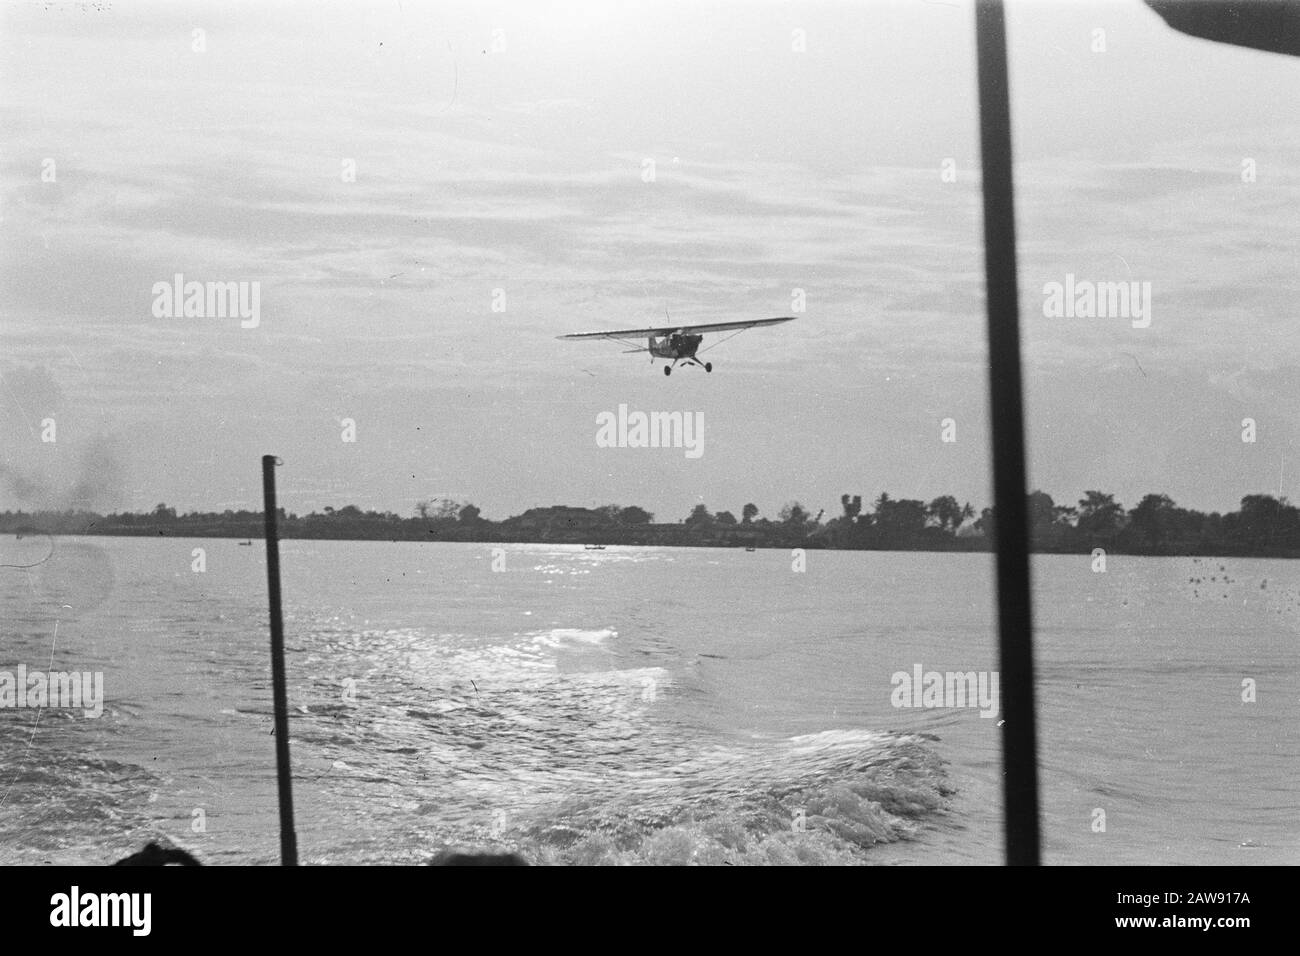 Light plane above a river Date: July 1947 Location: Indonesia Dutch East Indies Stock Photo